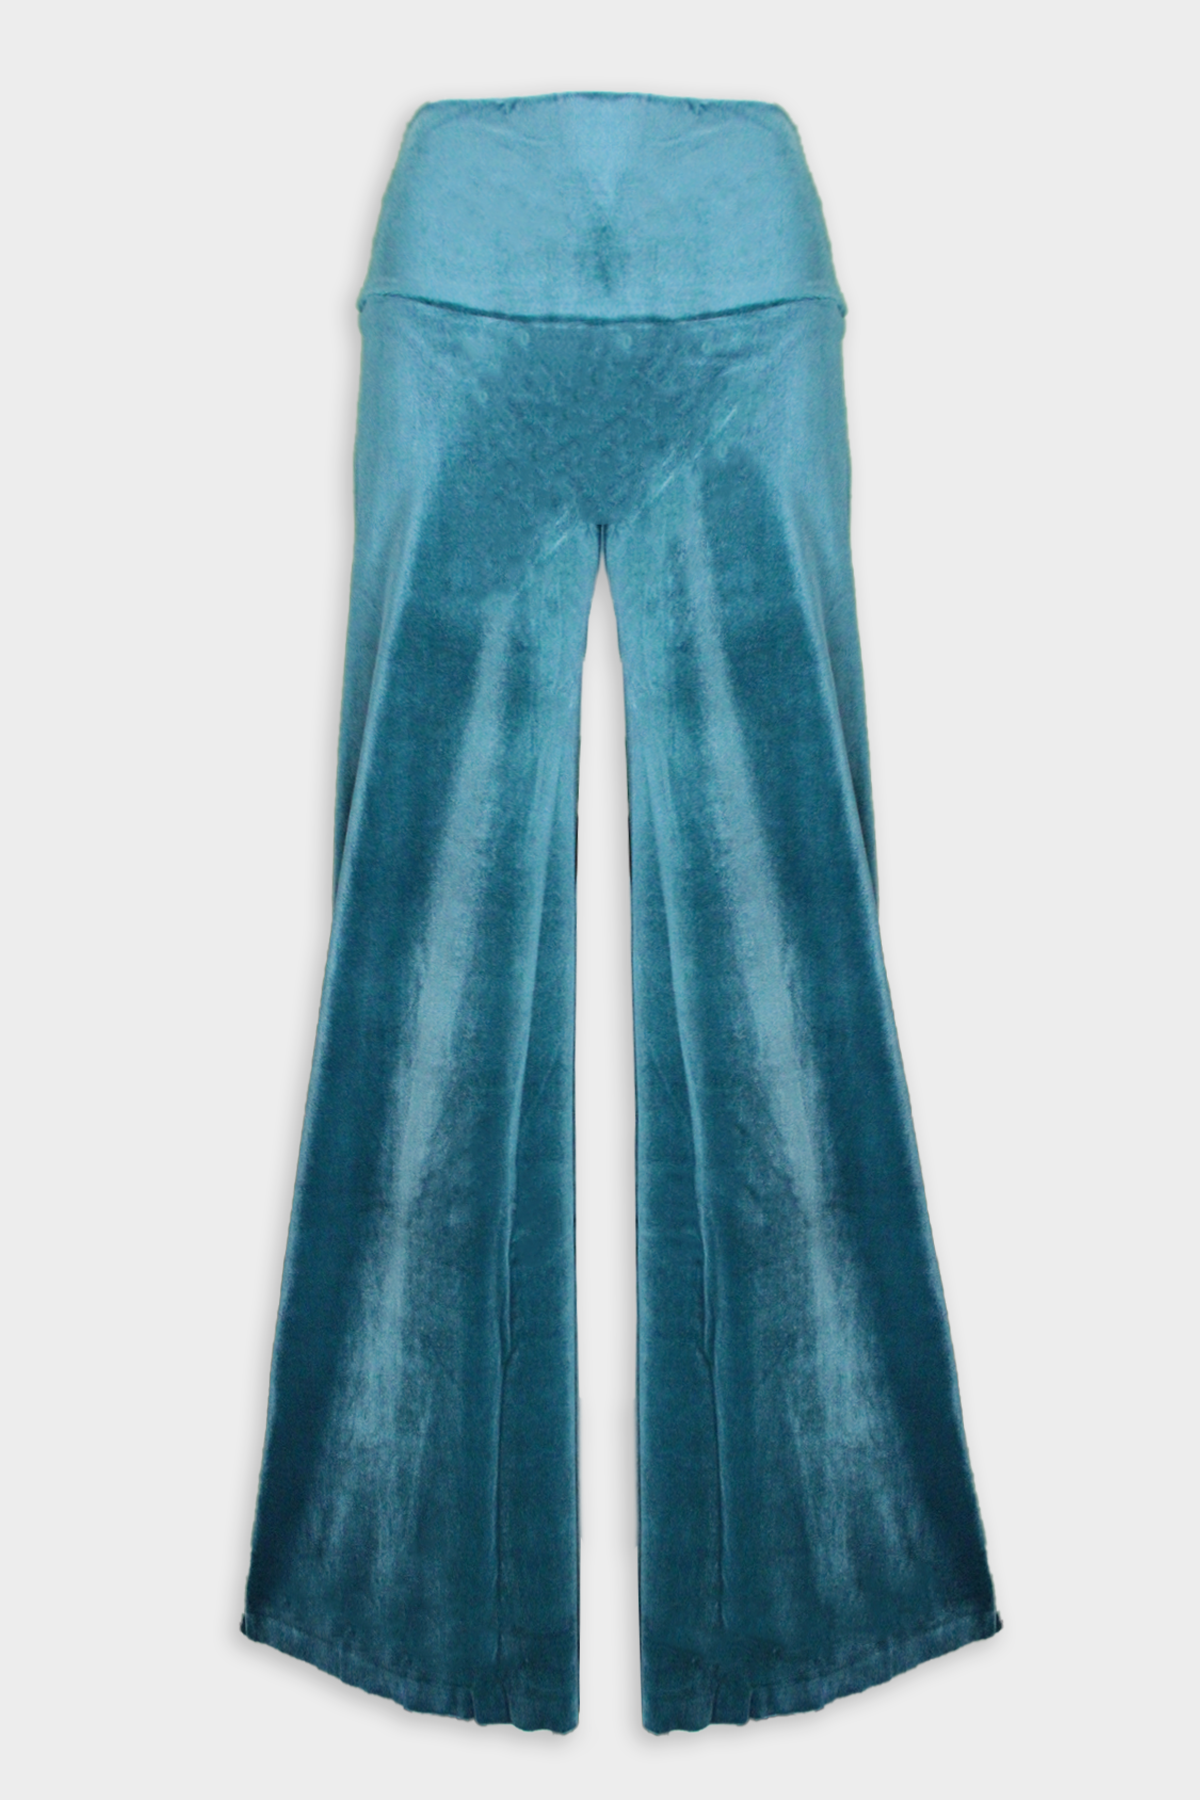 Elephant Pant in Teal